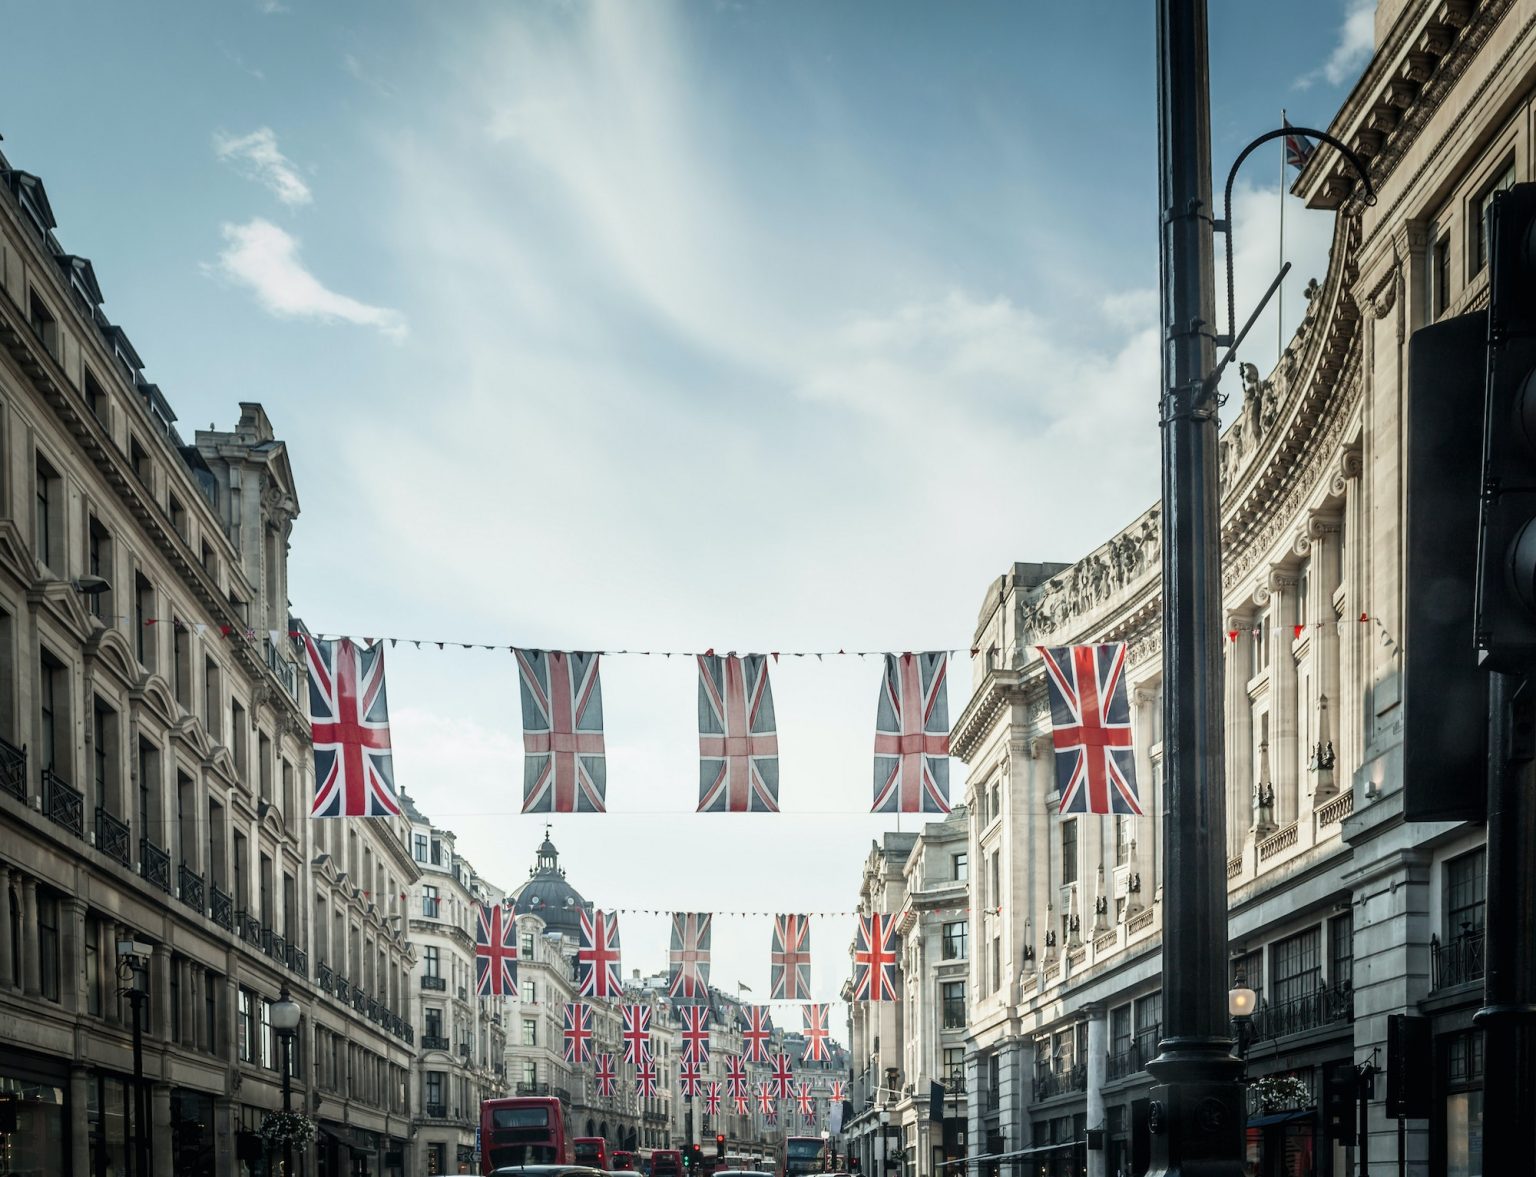 British flags hanging over city street